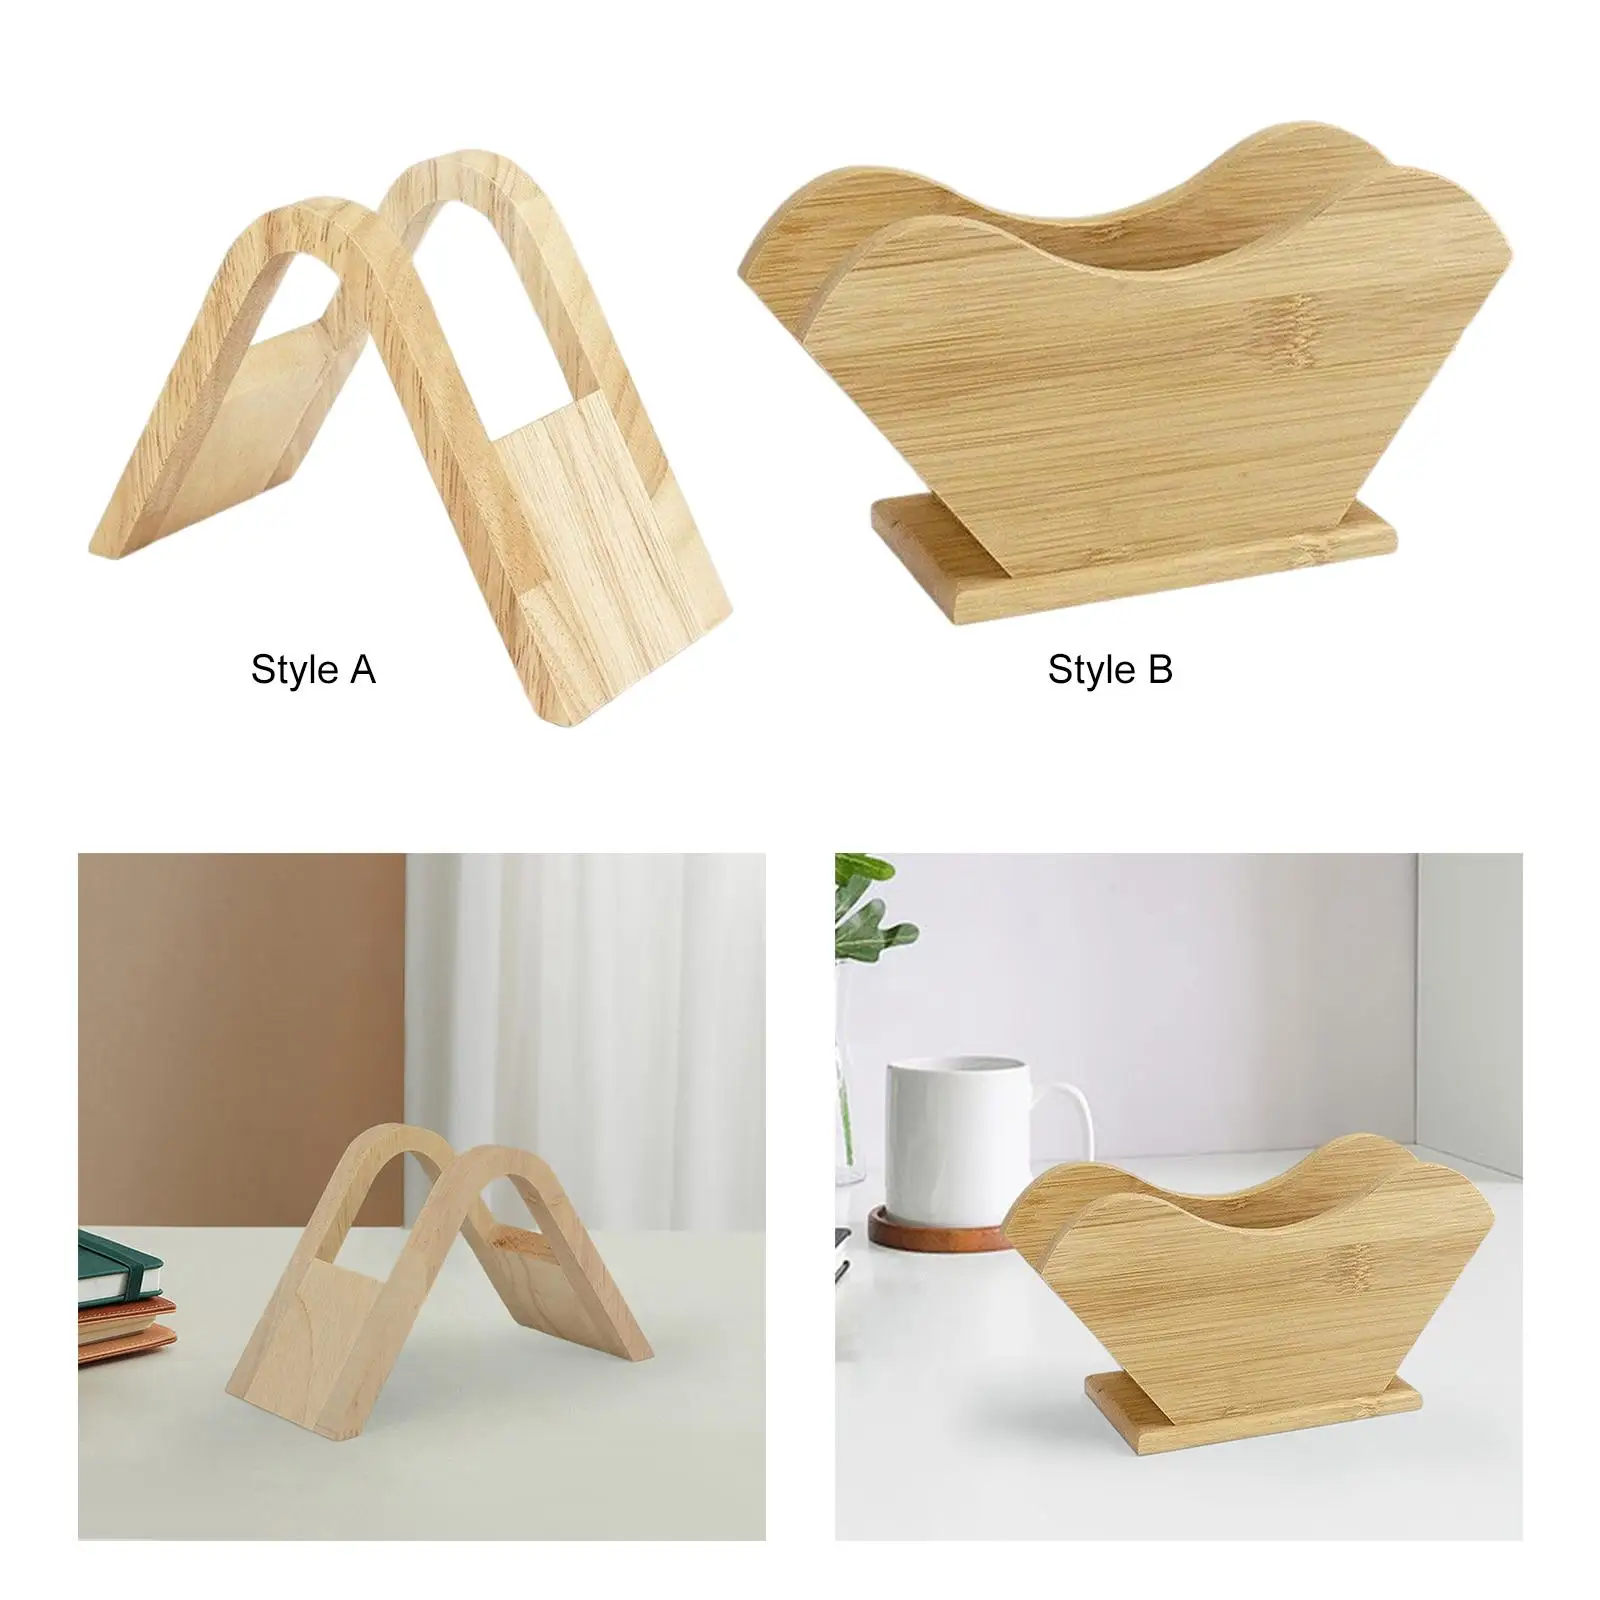 Cone Coffee Filter Holder Storage Coffee Accessories Stand Wooden for Kitchen Home